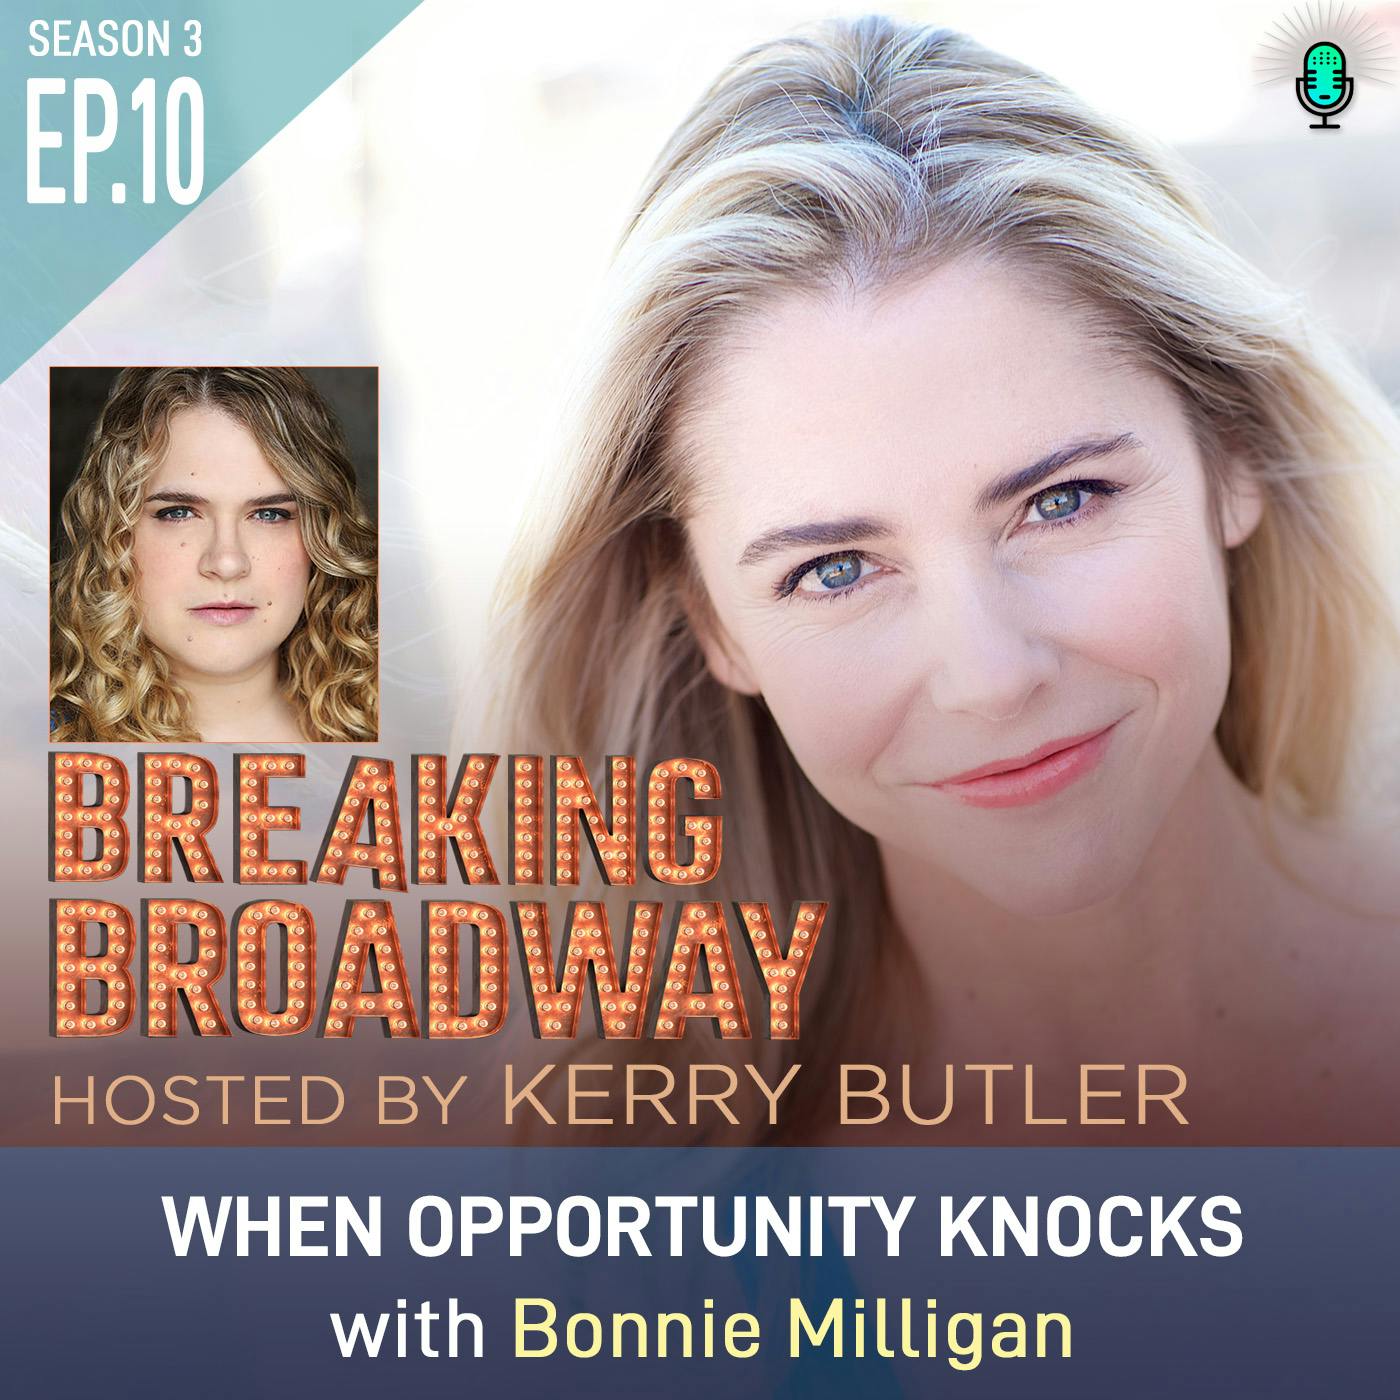 S3 EP10 - When Opportunity Knocks with Bonnie Milligan